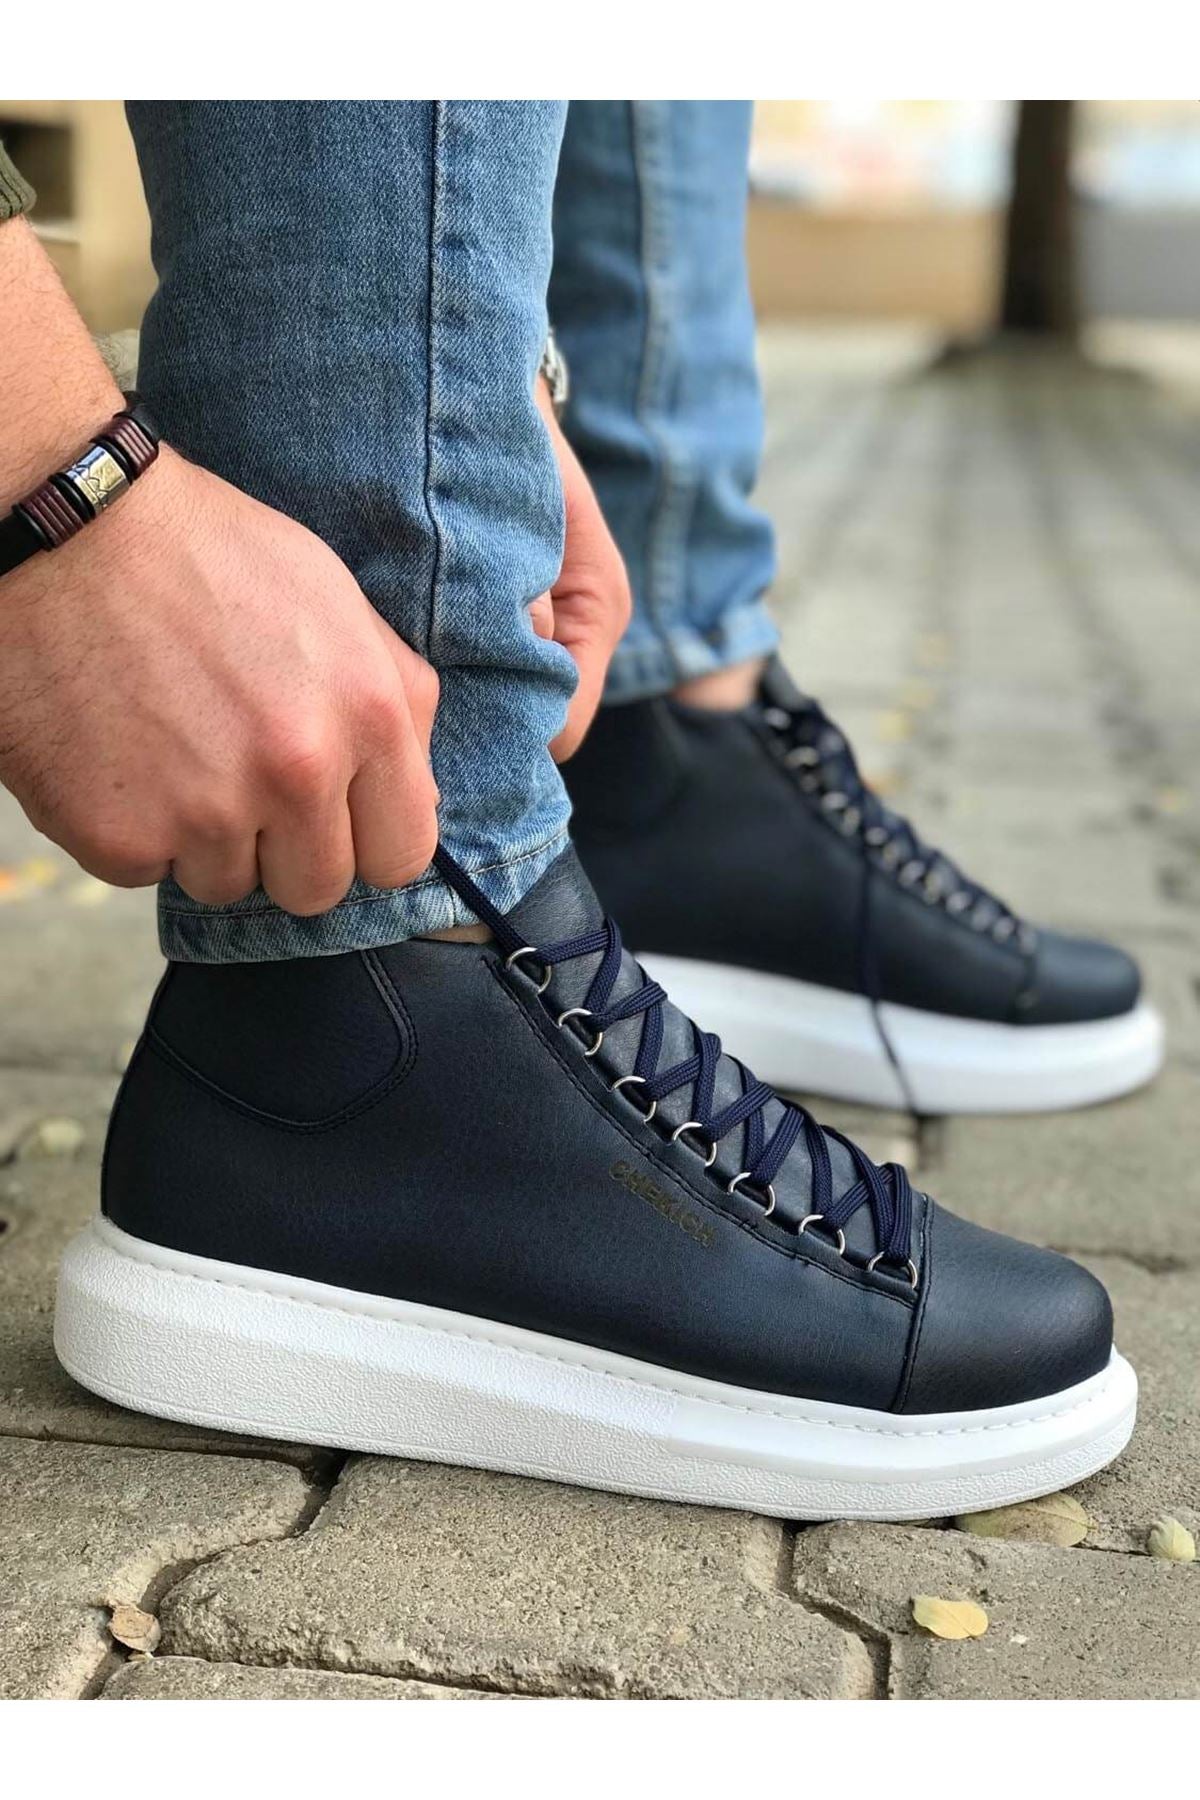 CH258 Men's Navy Blue-White Sole Metal Slug Lace-up High Sole Casual Sneaker Sports Boots - STREETMODE ™